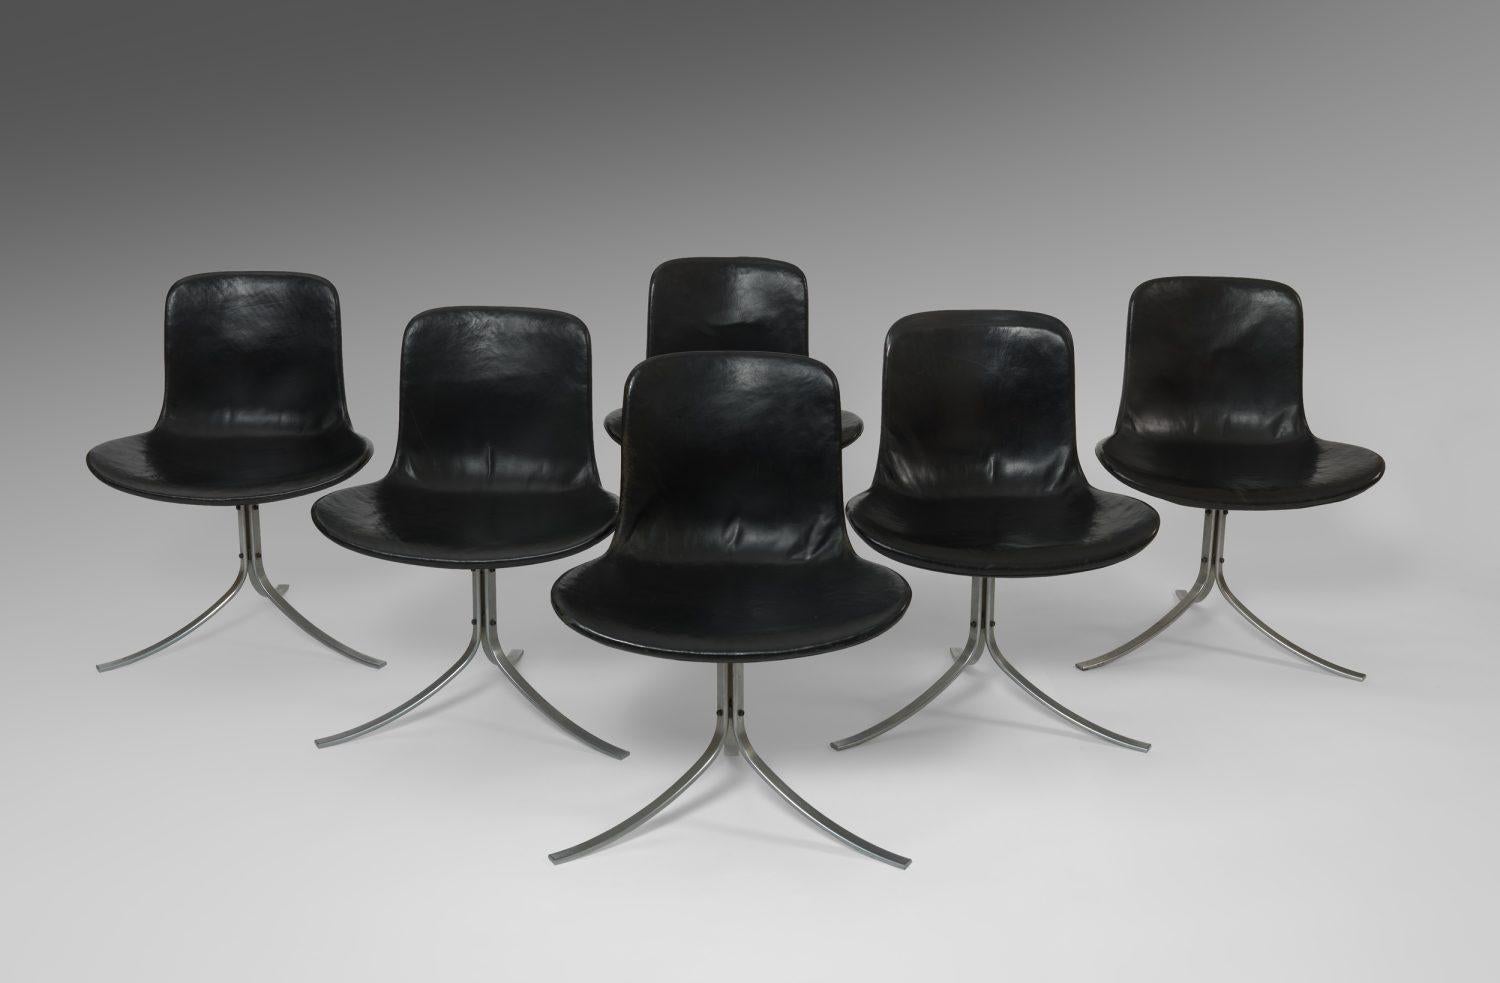 Set of six model PK9 dining chairs designed by Poul Kjaerholm for E Kold Christensen,
Denmark, 1960s.

Leather and steel.

Stamped.

Dimensions:
H: 75.5 cm / 2' 1/2